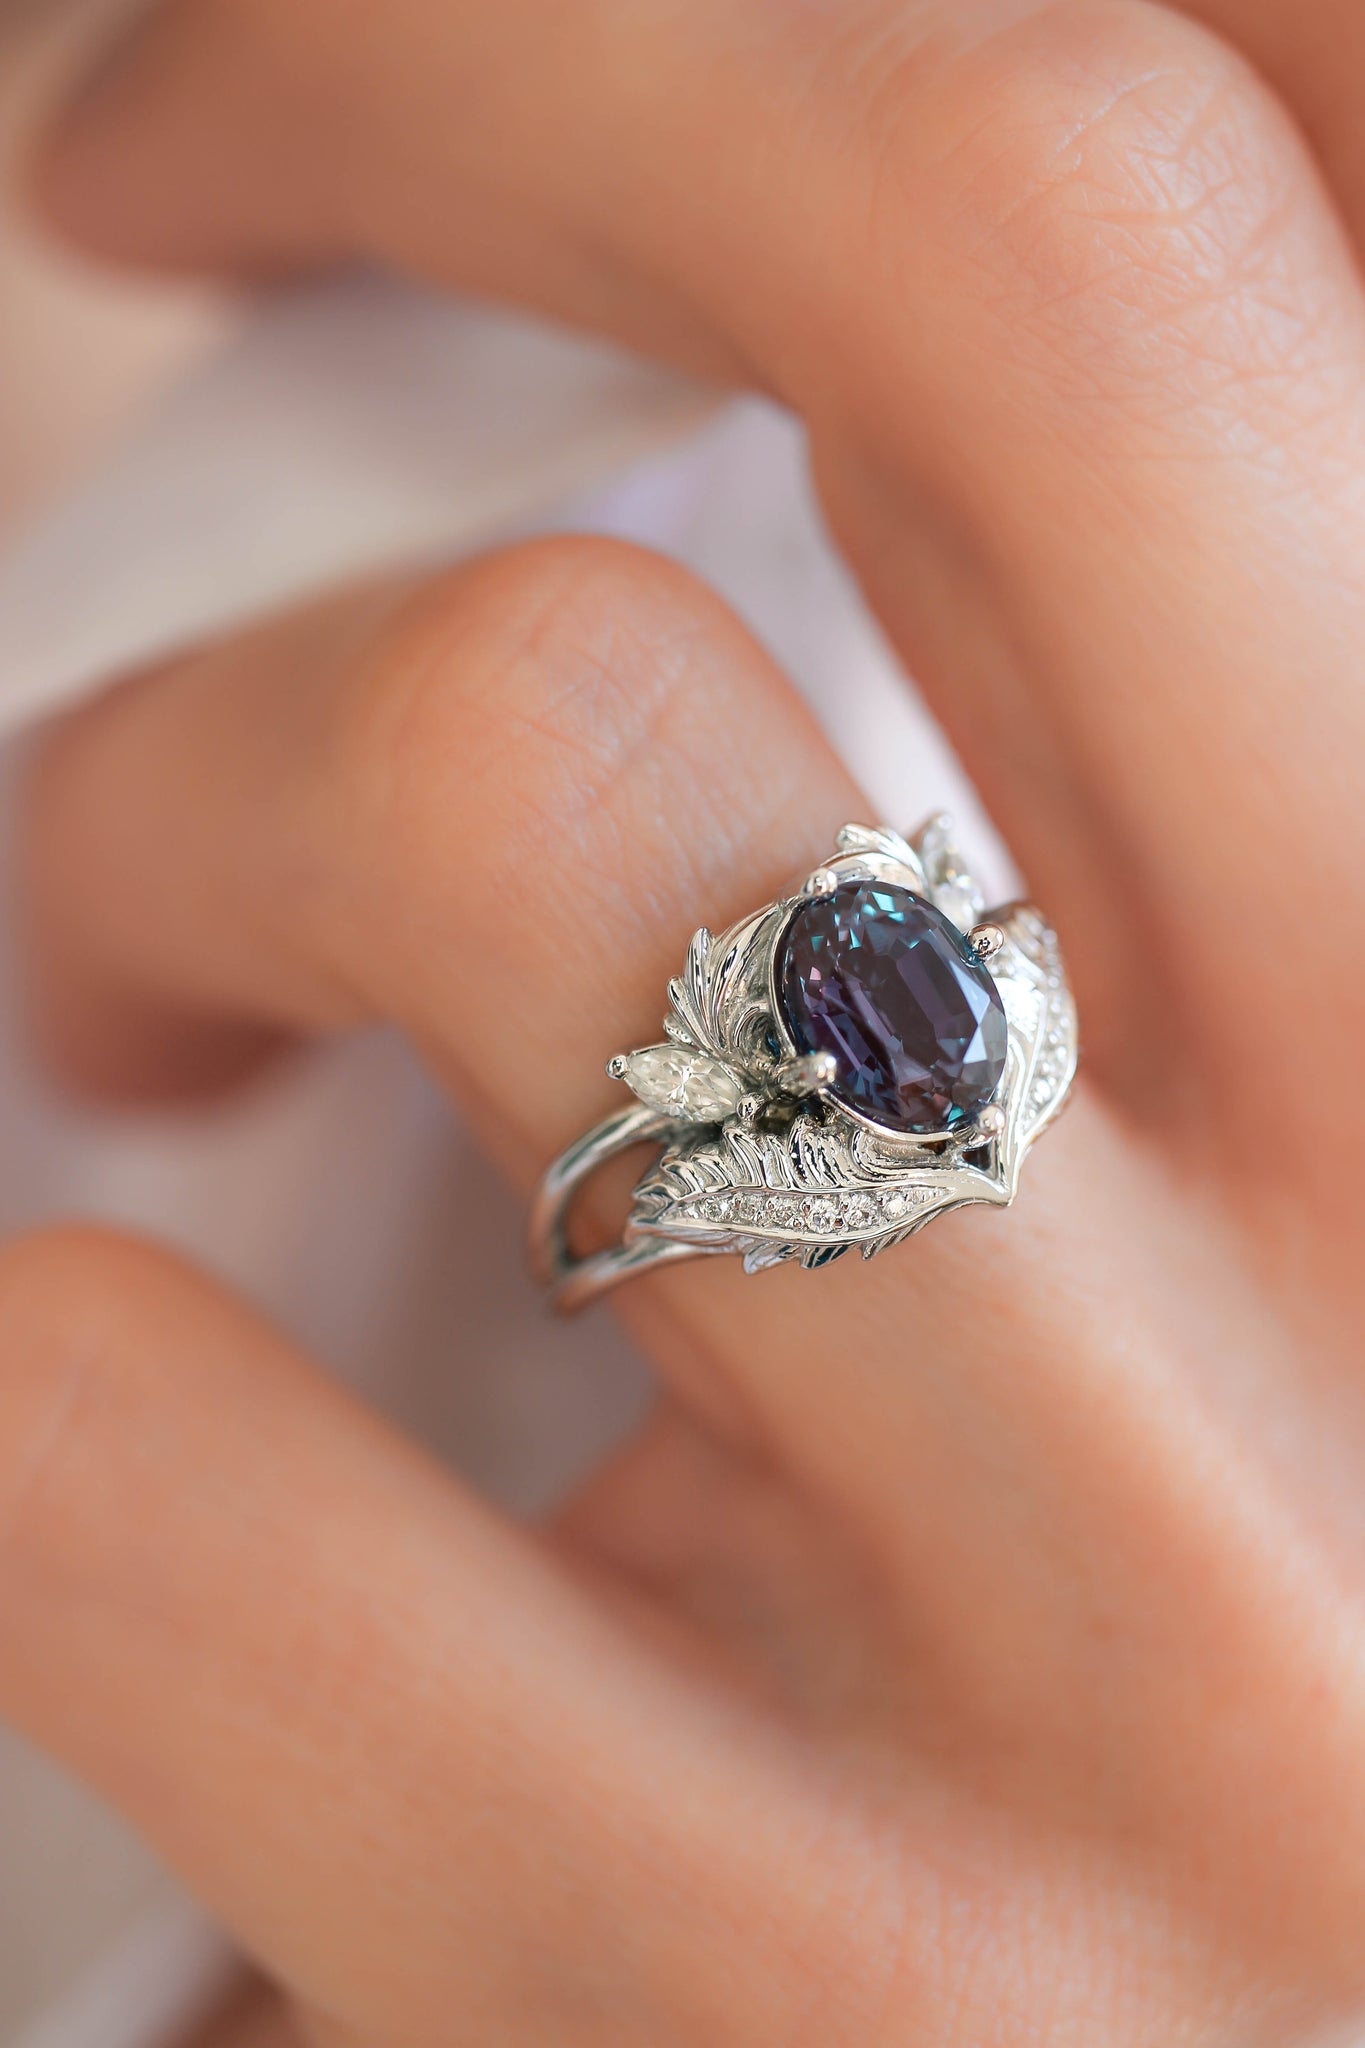 Alexandrite and diamonds engagement ring / is alexandrite more valuable than diamonds